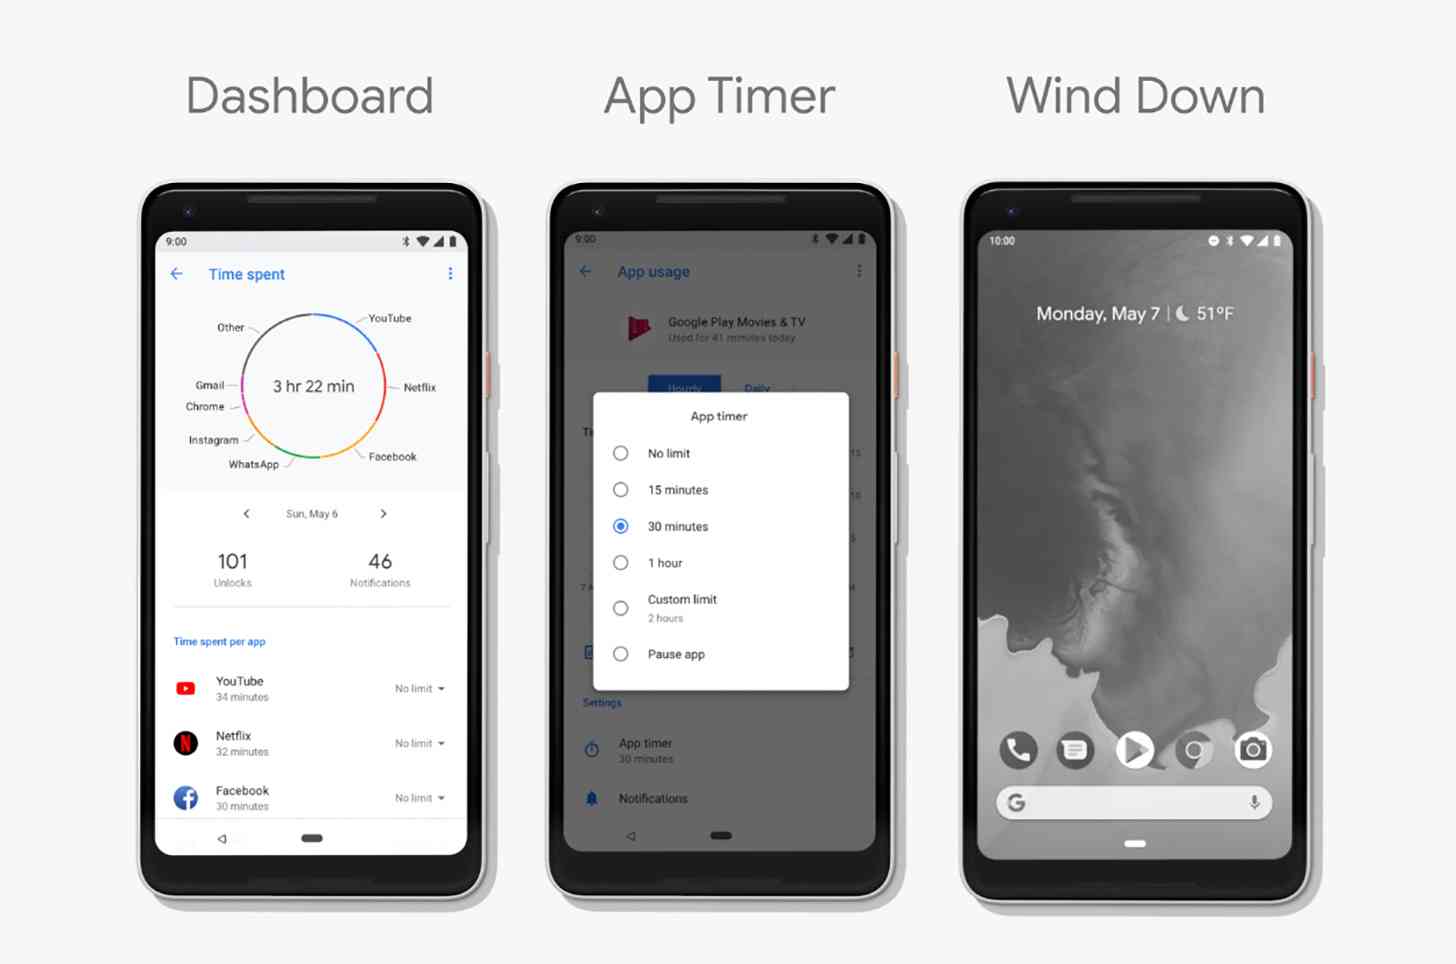 Android P Dashboard, App Timer, Wind Down